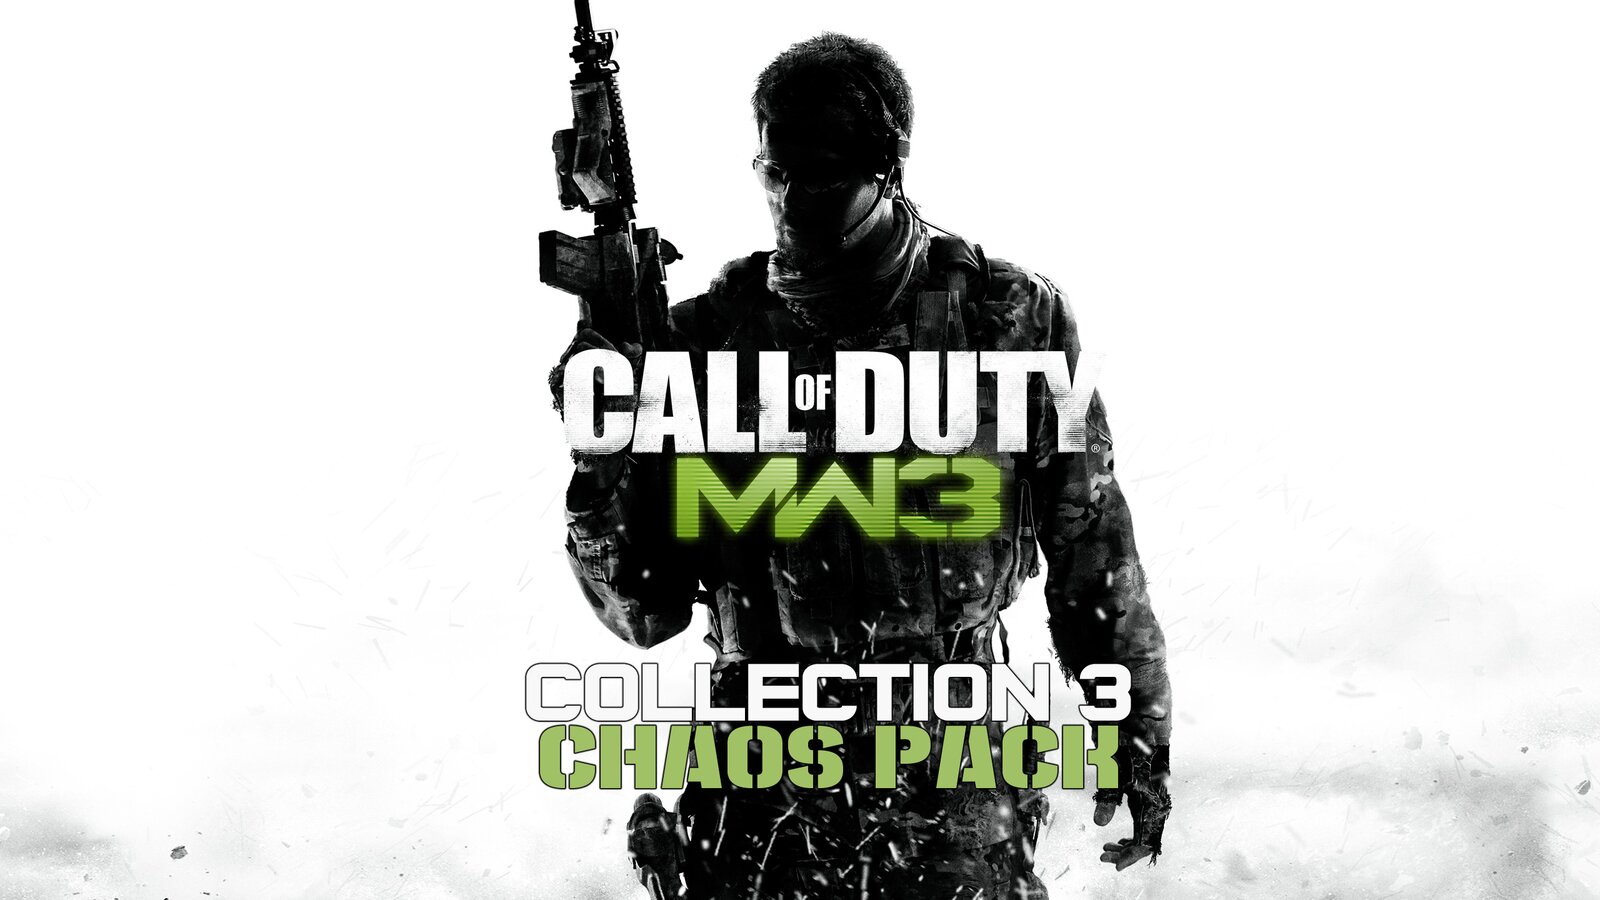 Call of Duty: Modern Warfare 3 - Collection 3 Chaos Pack